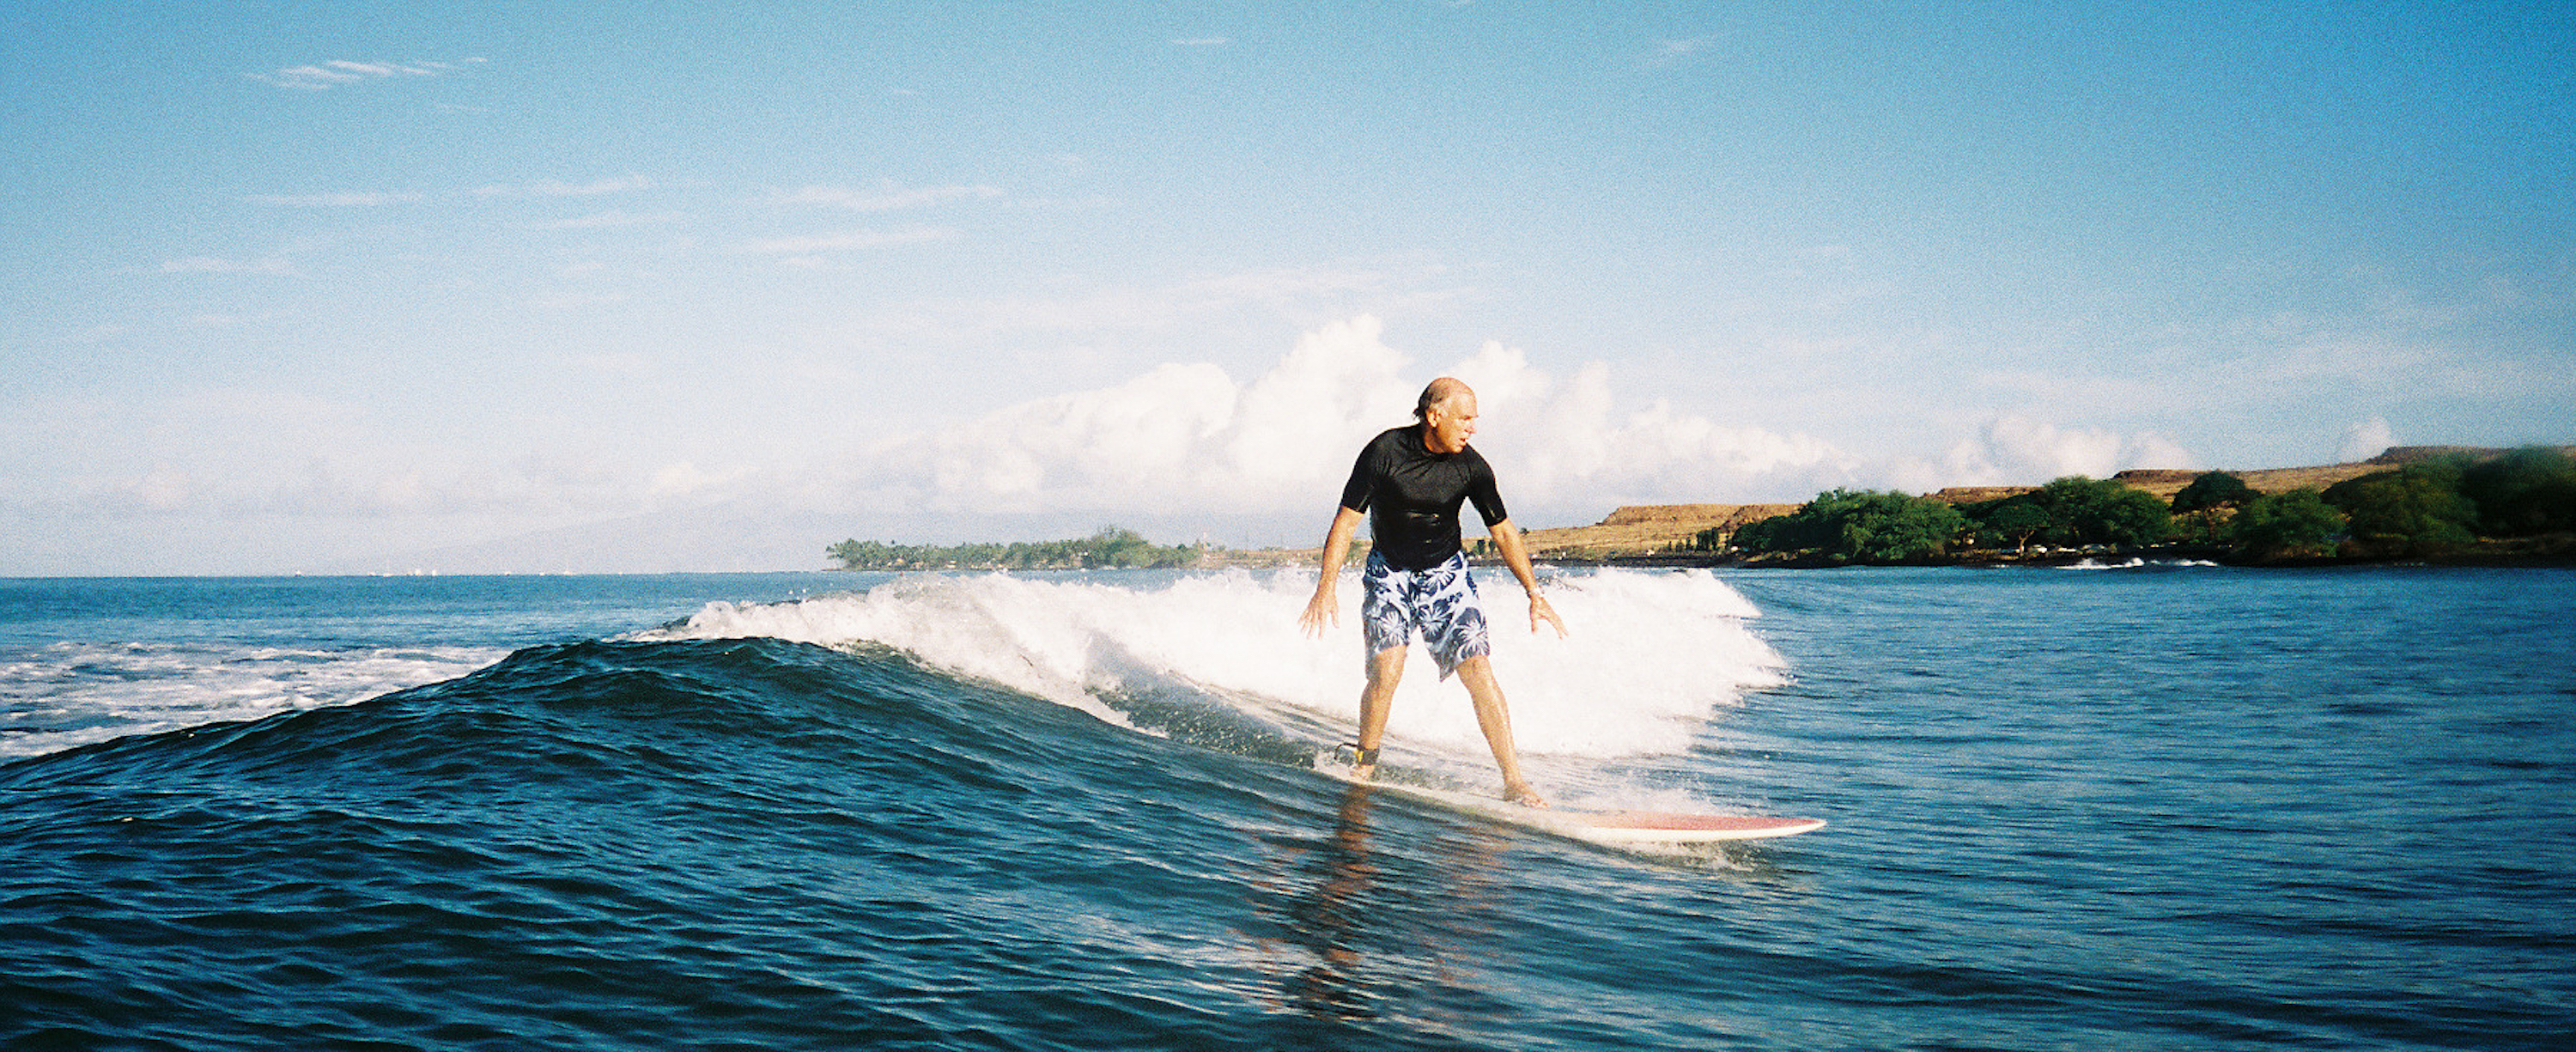 Ancient Water: A Brief History of Surfing - Lazy Surfer Blog